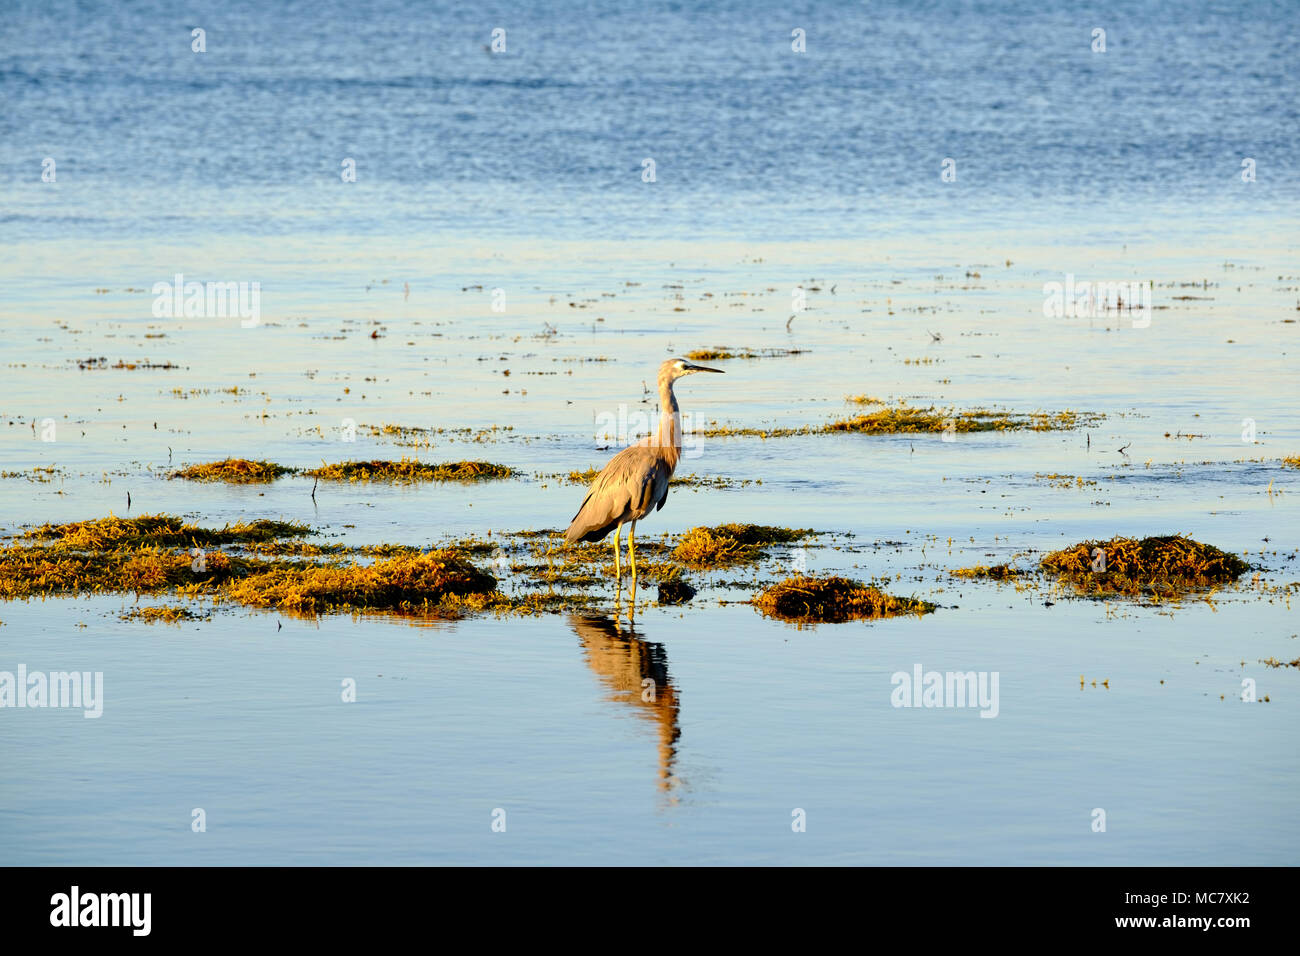 White Faced Heron foraging at low tide in the early morning among rocks covered with seaweed Neptune's necklace (Hormosira banksii) Stock Photo